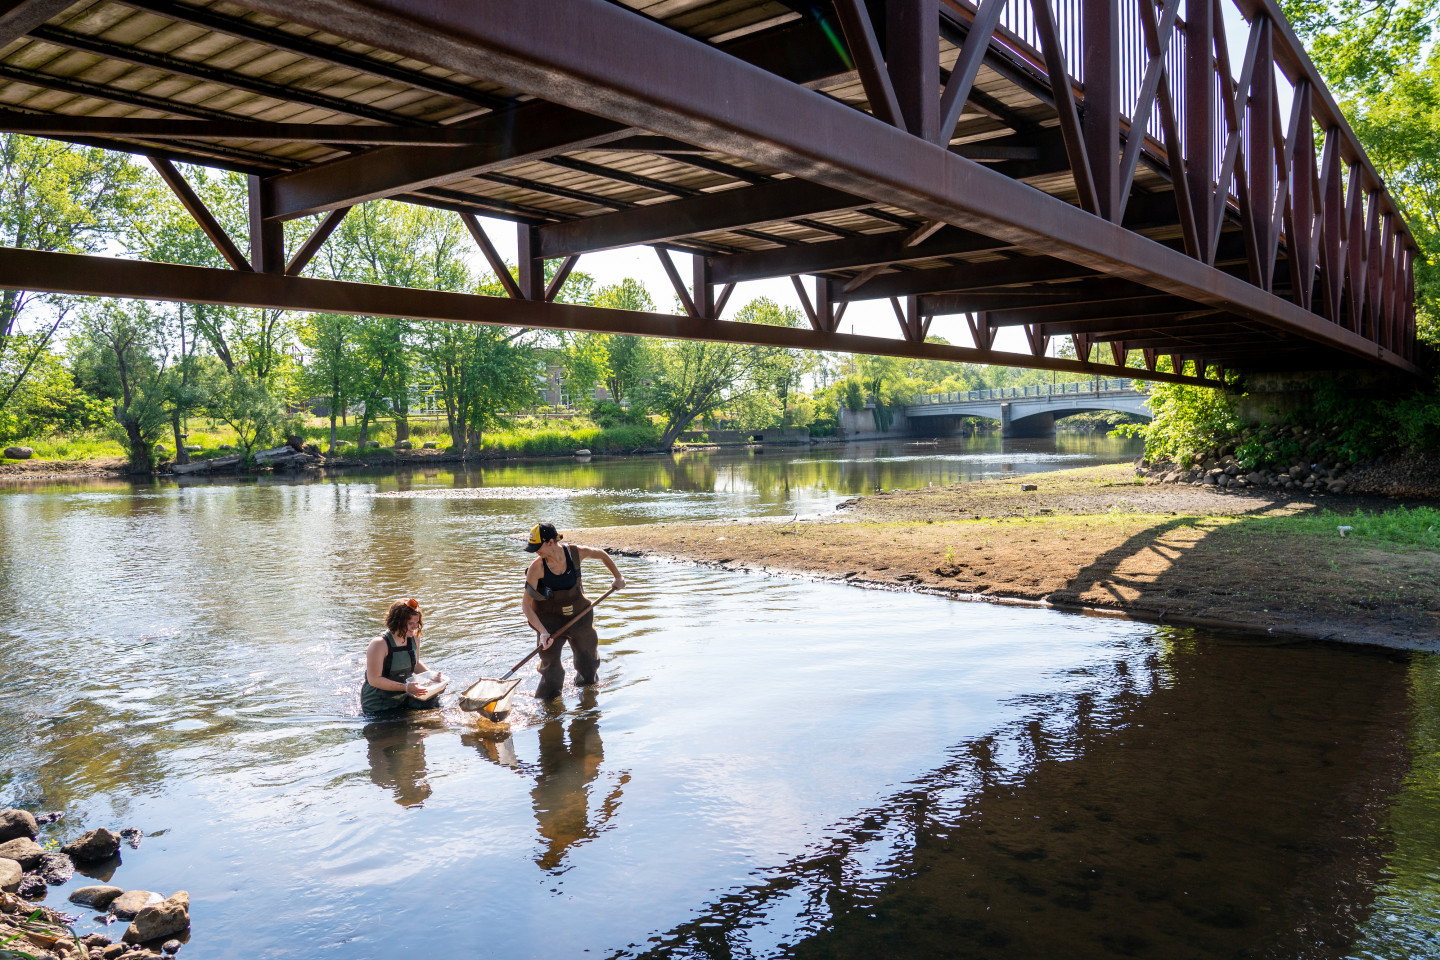 Students stand under a bridge in the Kalamazoo river.